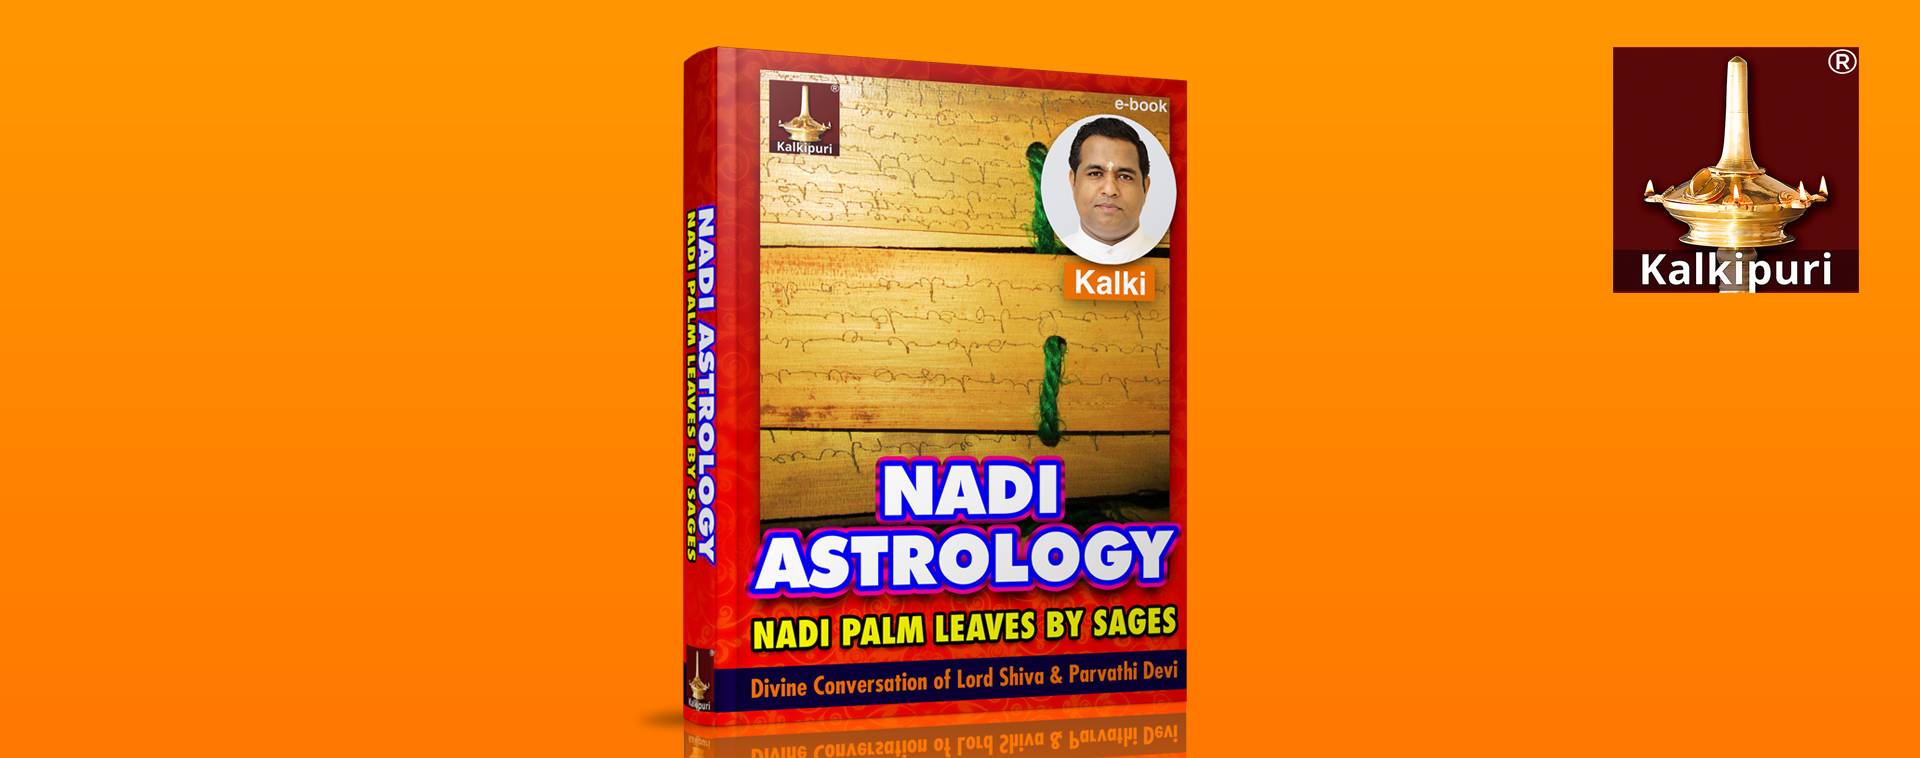 Book Nadi Astrology Nadi Palm Leaves by Sages. Written by Kalki. ISBN: 9789355785169.